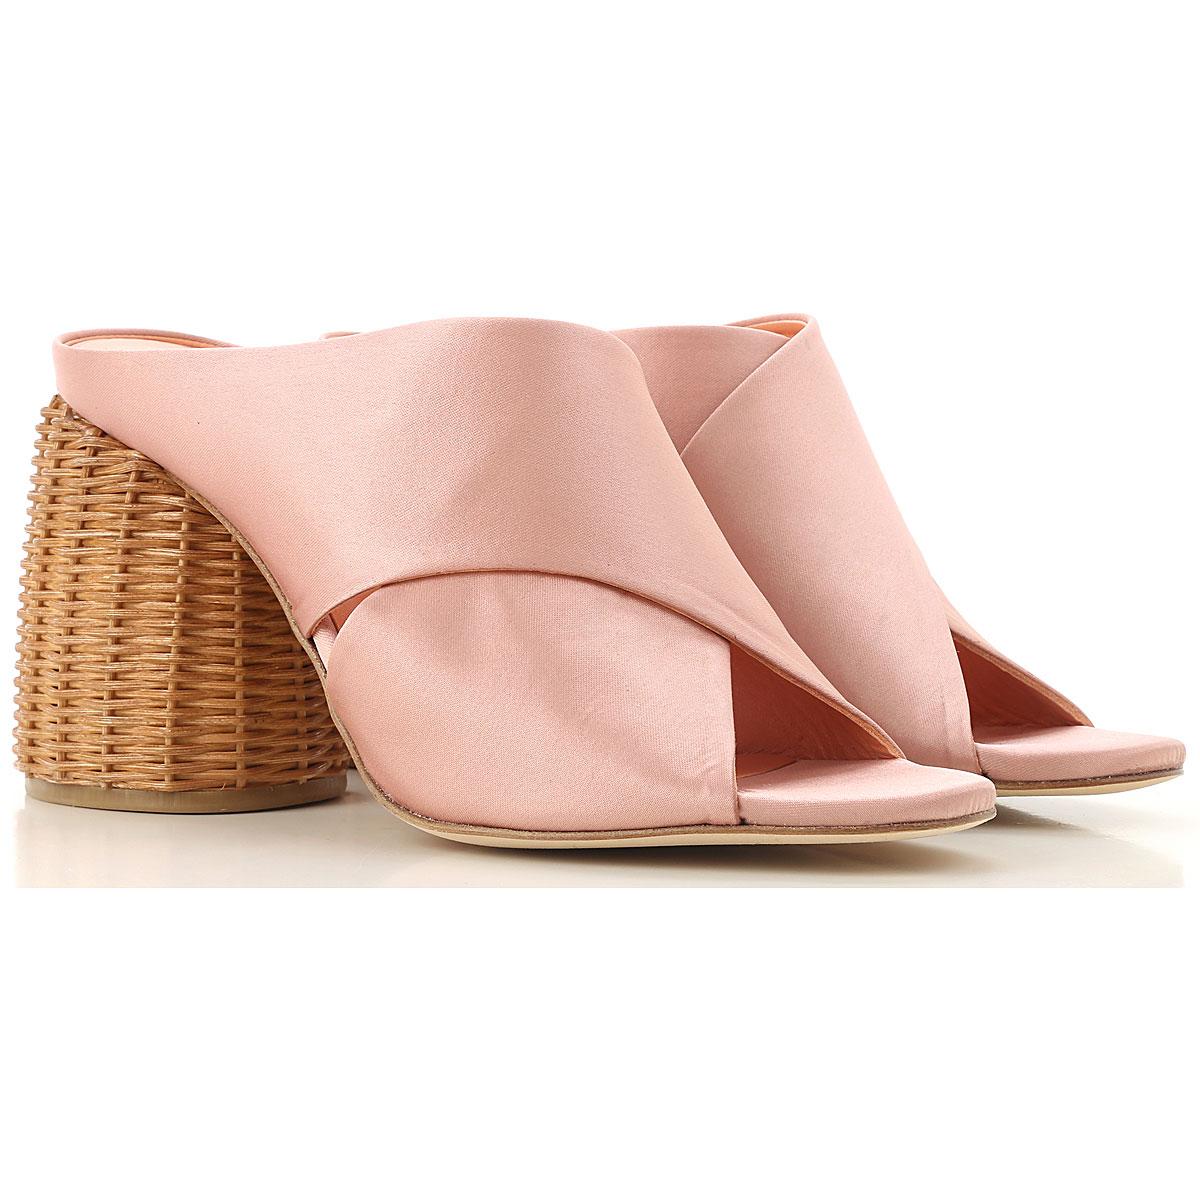 Paloma Barceló Sandals For Women On Sale in Pink Save 10